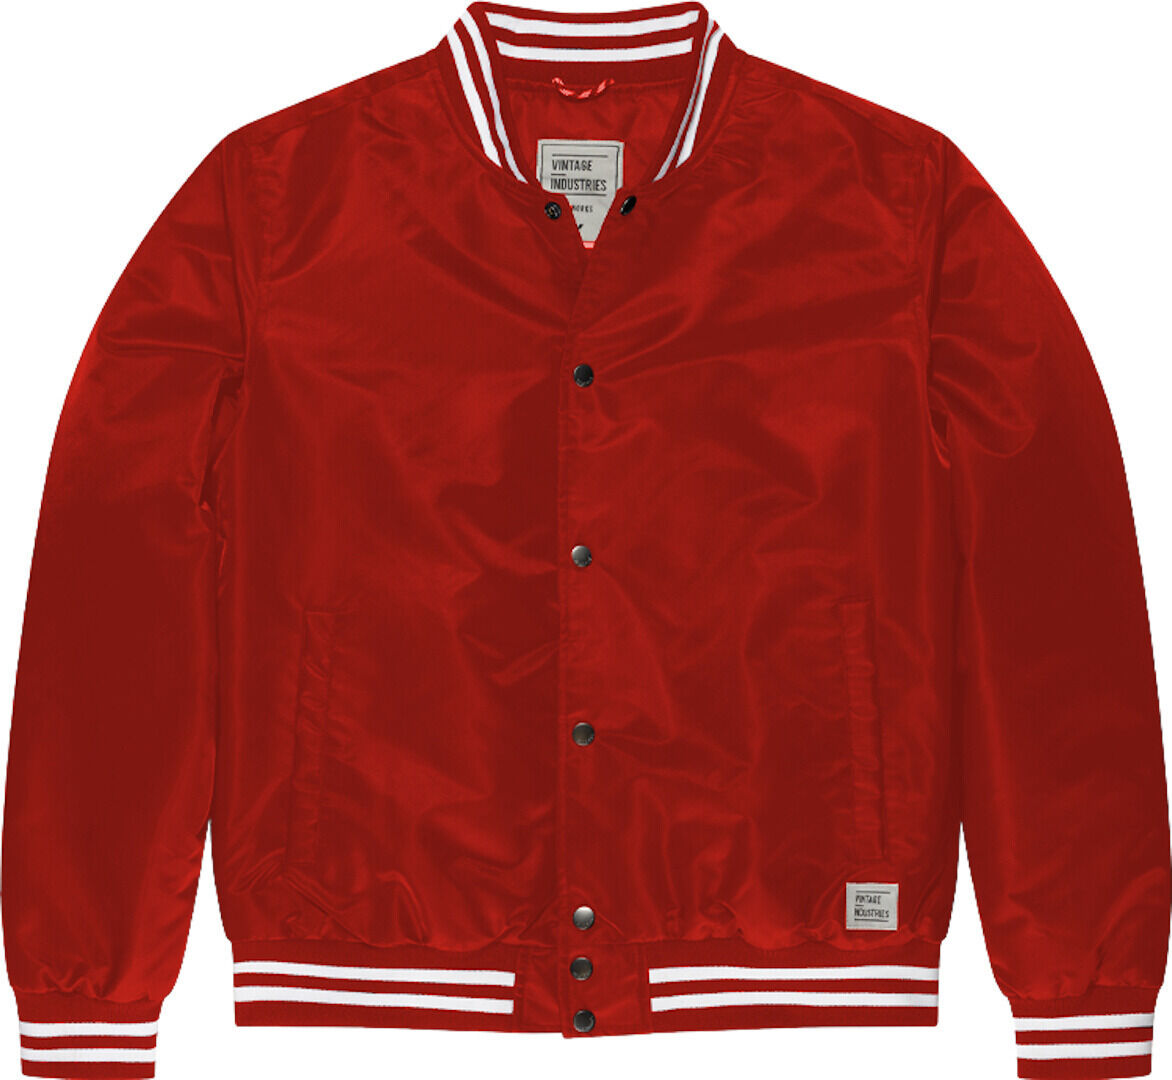 Vintage Industries Chapman Giacca Rosso 2XL